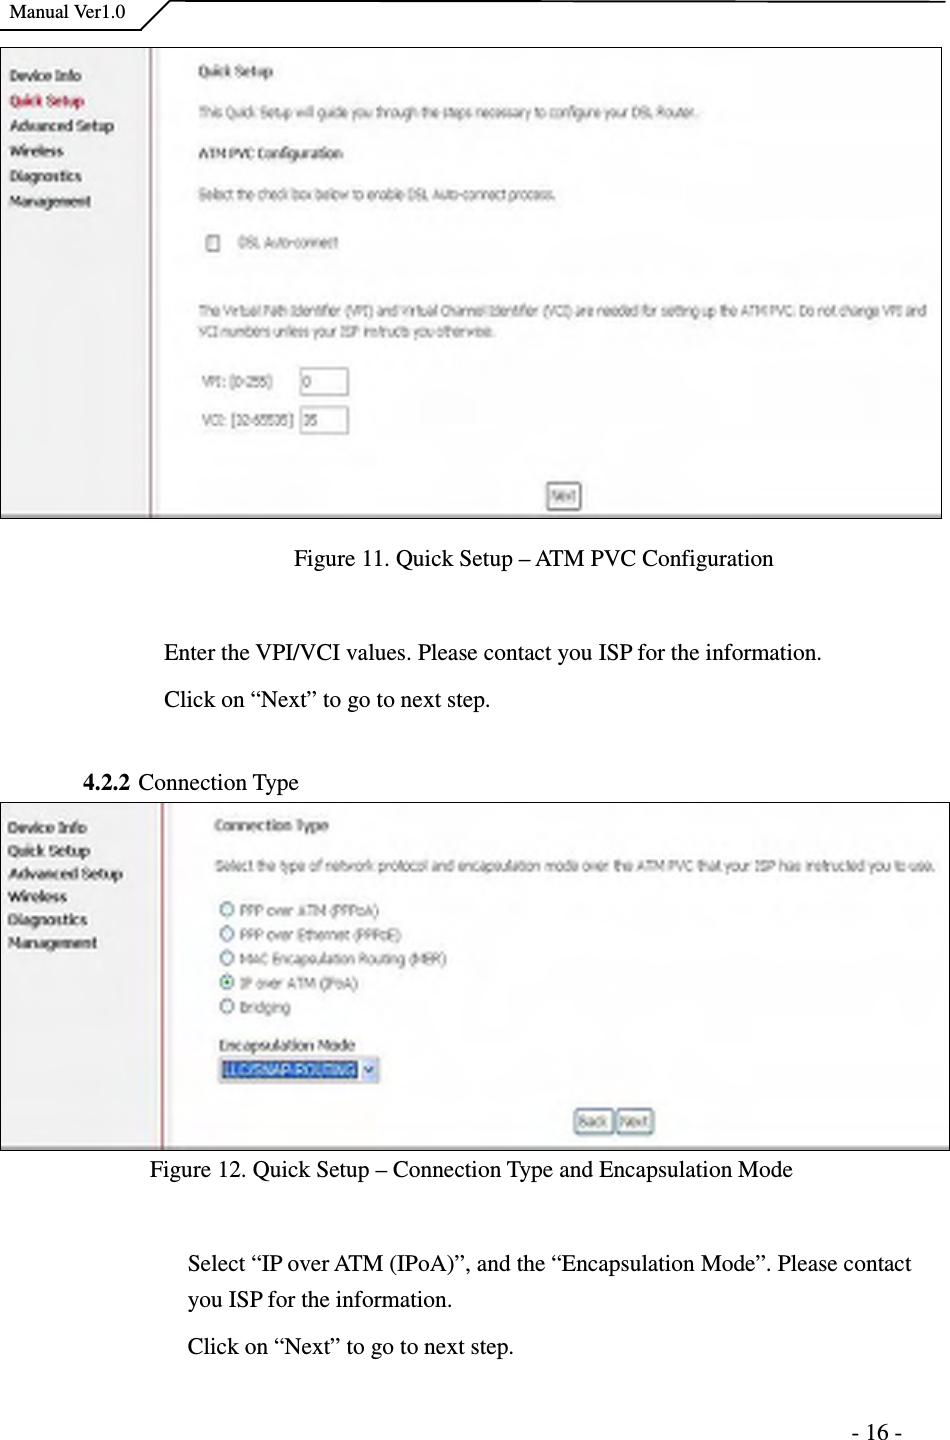    Manual Ver1.0                                                                      - 16 -  Figure 11. Quick Setup – ATM PVC Configuration  Enter the VPI/VCI values. Please contact you ISP for the information. Click on “Next” to go to next step.  4.2.2 Connection Type Figure 12. Quick Setup – Connection Type and Encapsulation Mode  Select “IP over ATM (IPoA)”, and the “Encapsulation Mode”. Please contact you ISP for the information. Click on “Next” to go to next step. 